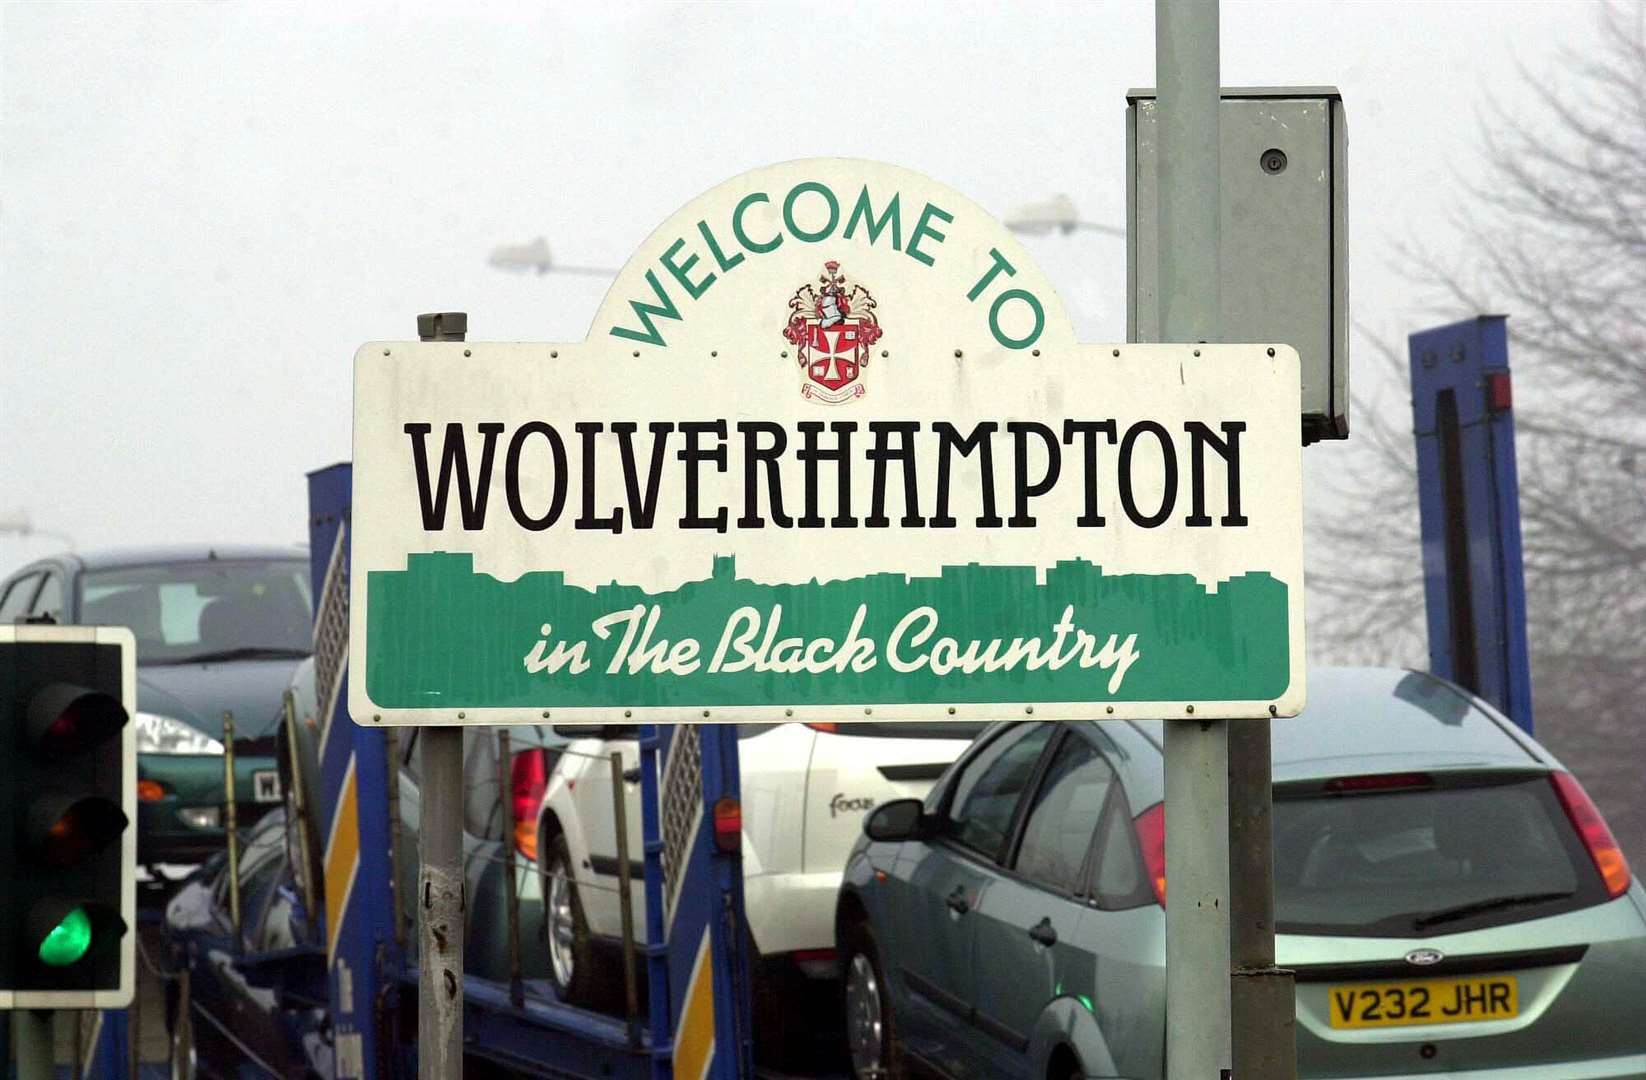 A sign welcoming visitors to Wolverhampton, which was made a city in 2000